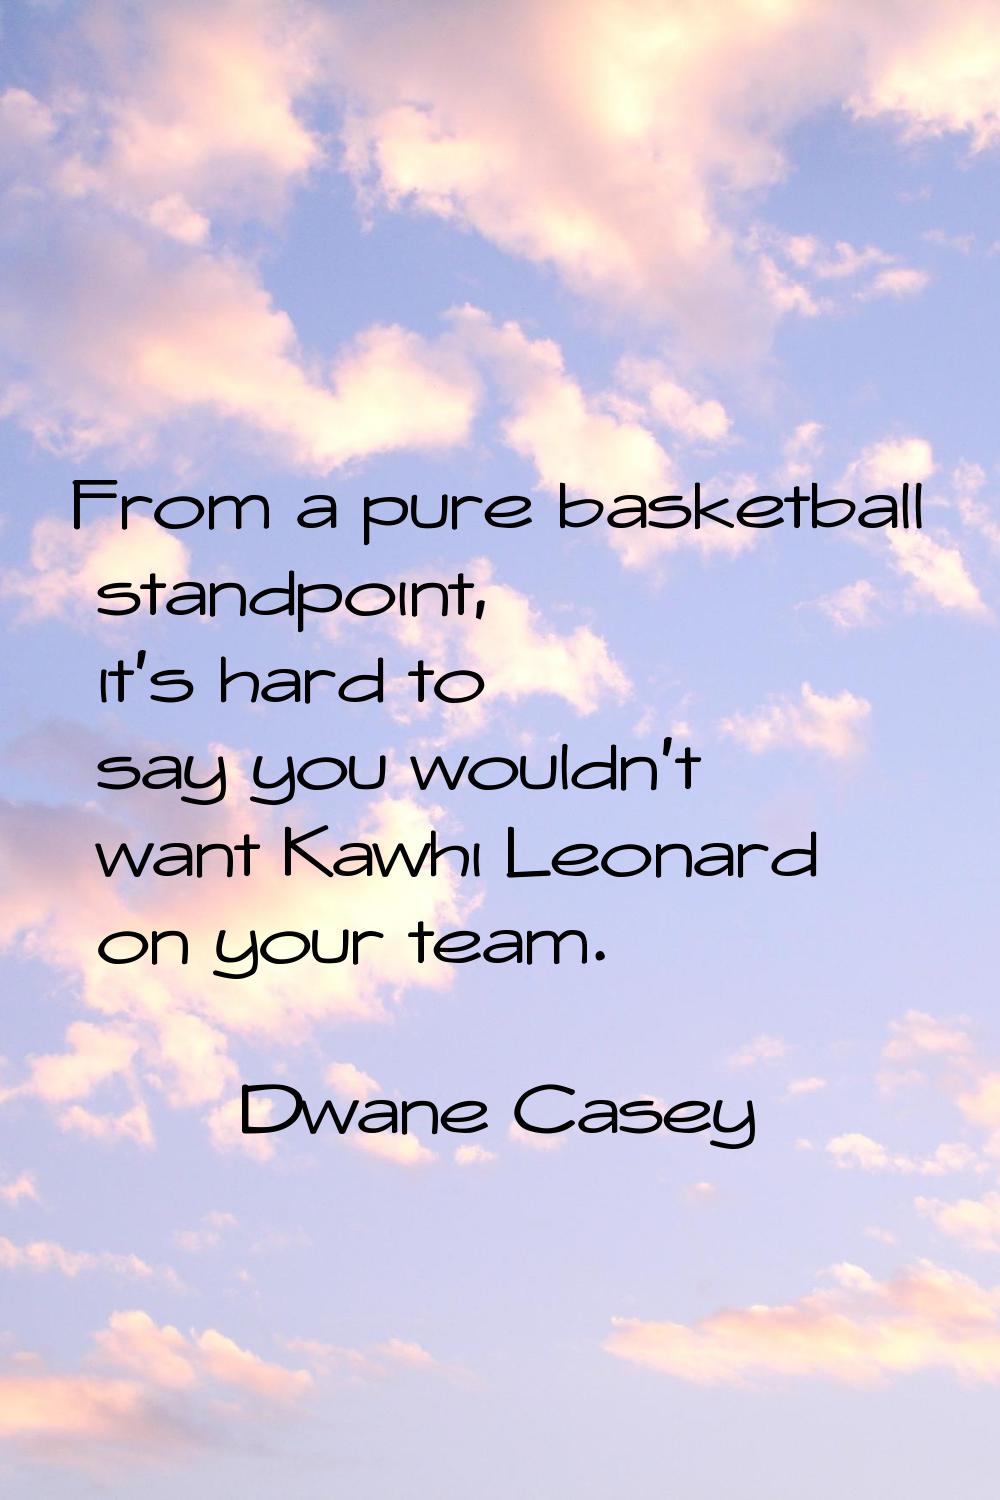 From a pure basketball standpoint, it's hard to say you wouldn't want Kawhi Leonard on your team.